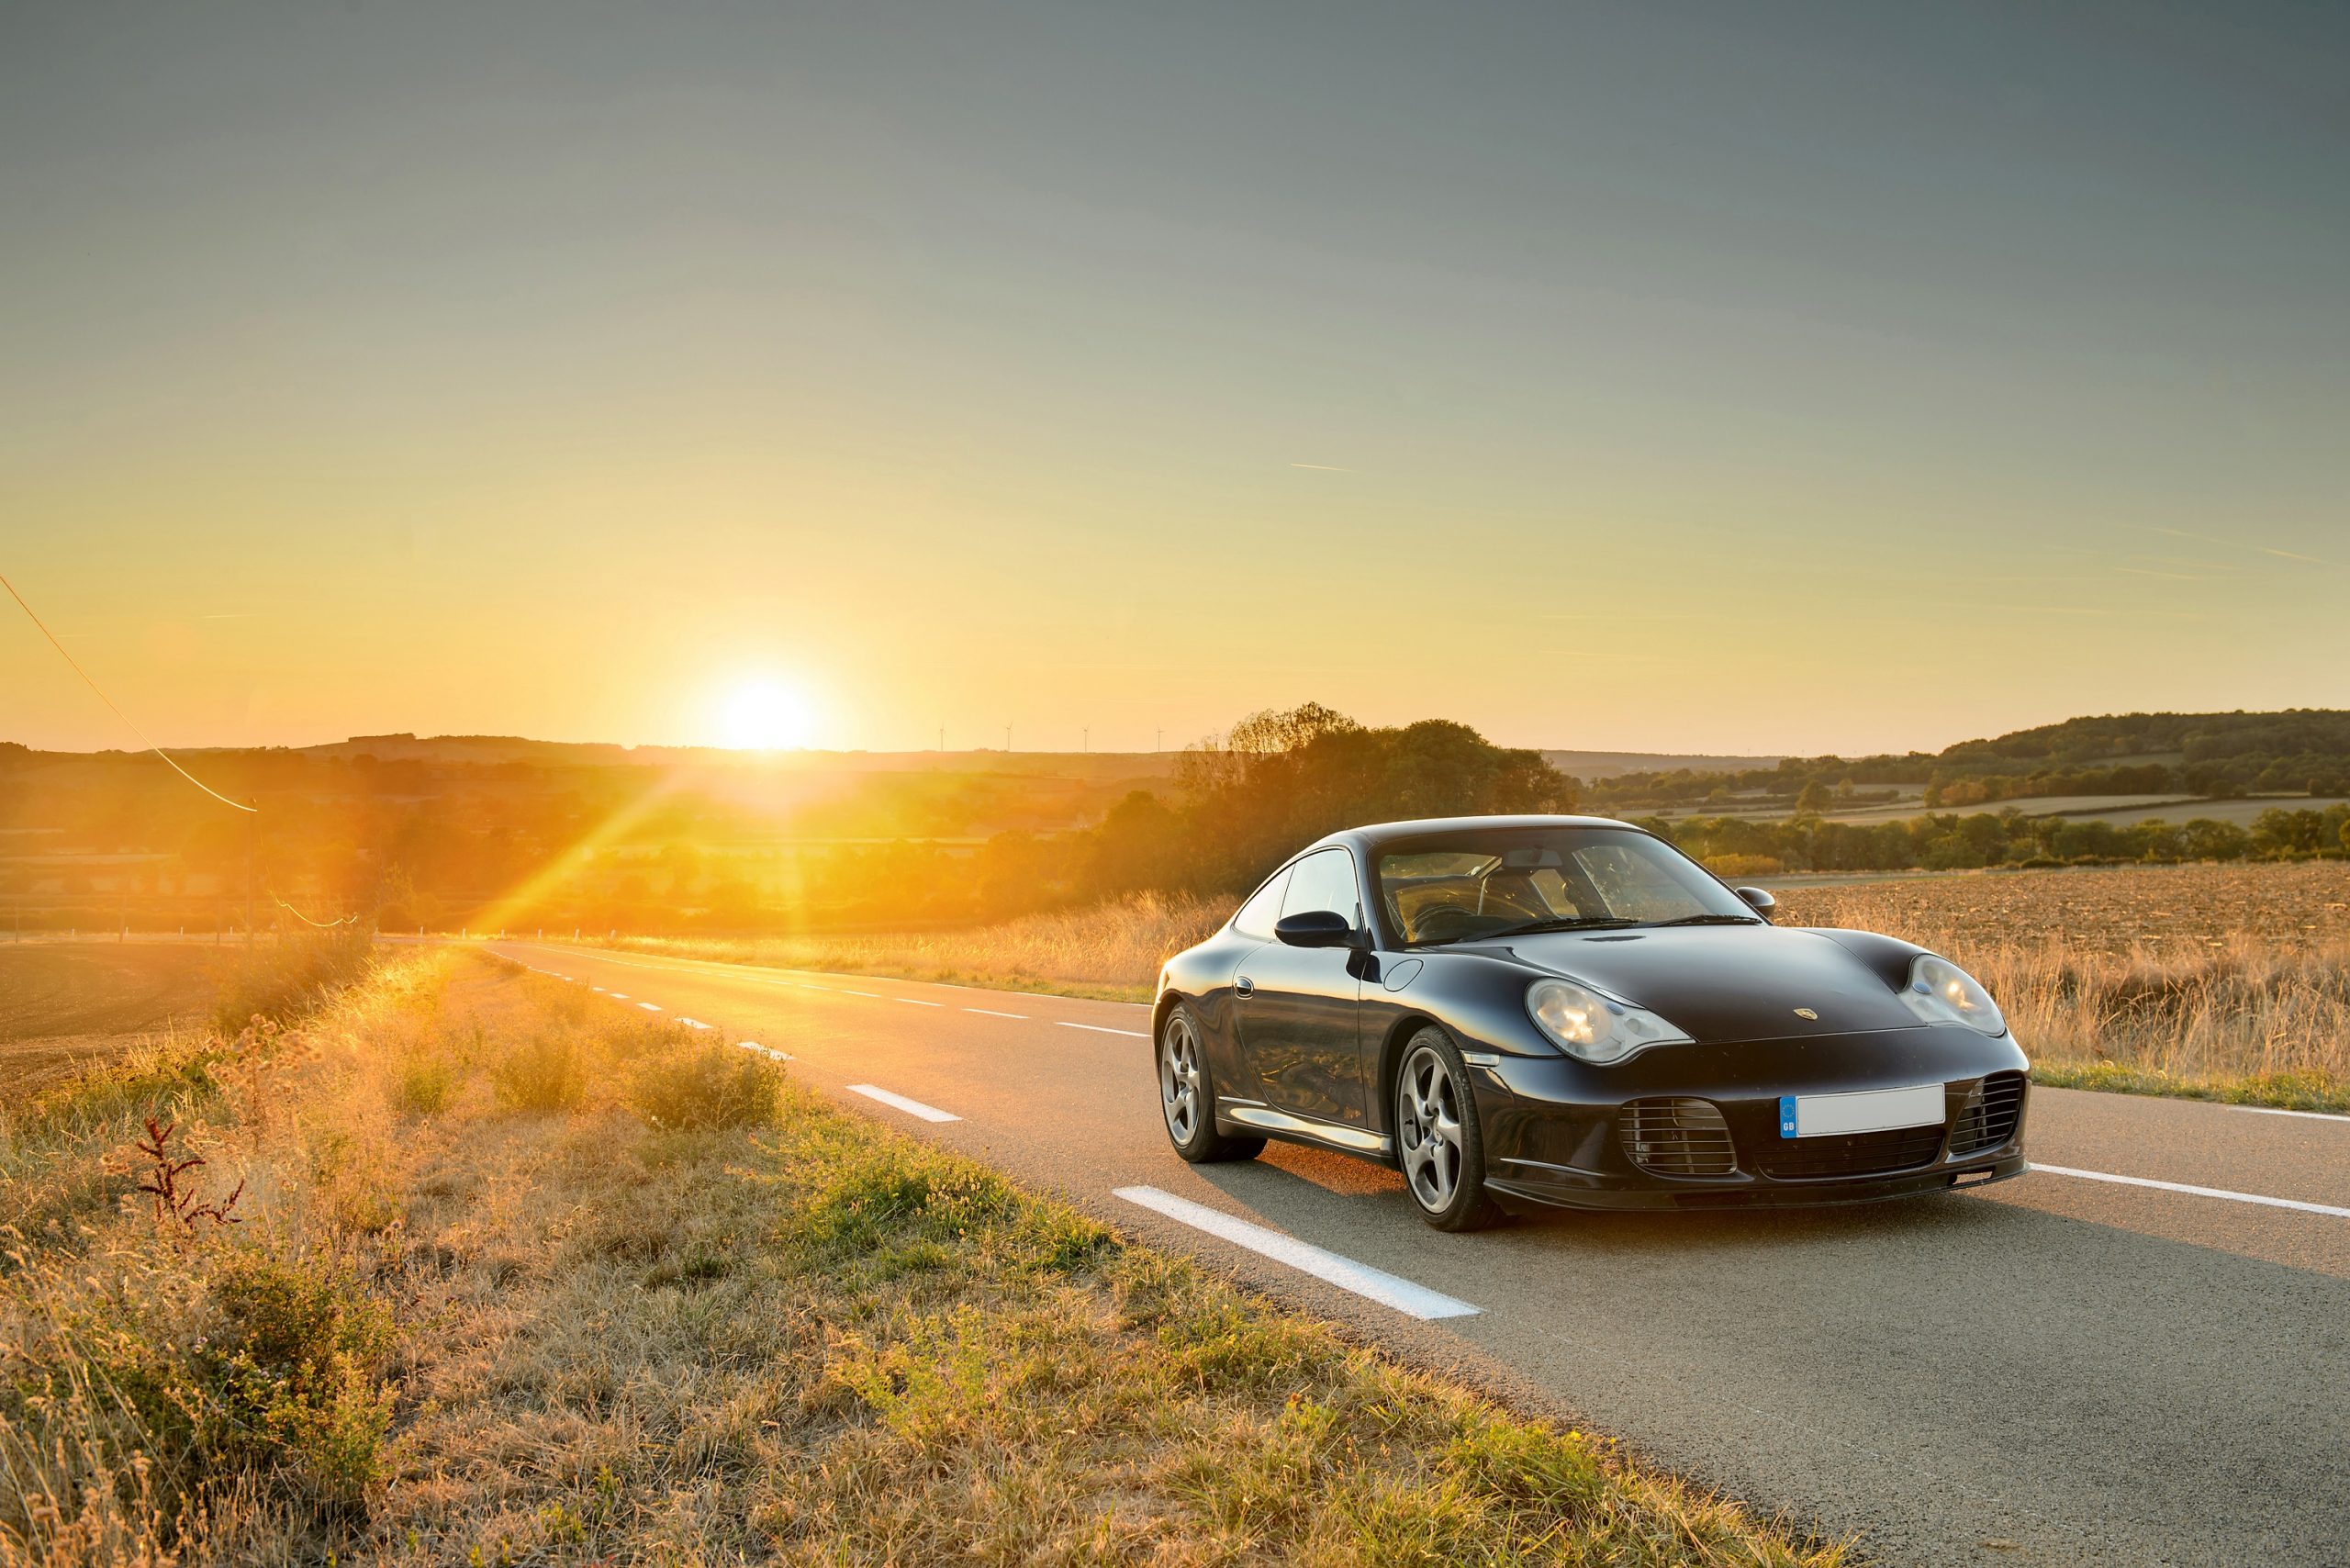 A black 996 generation 911 shot from the front at sunset on a country road